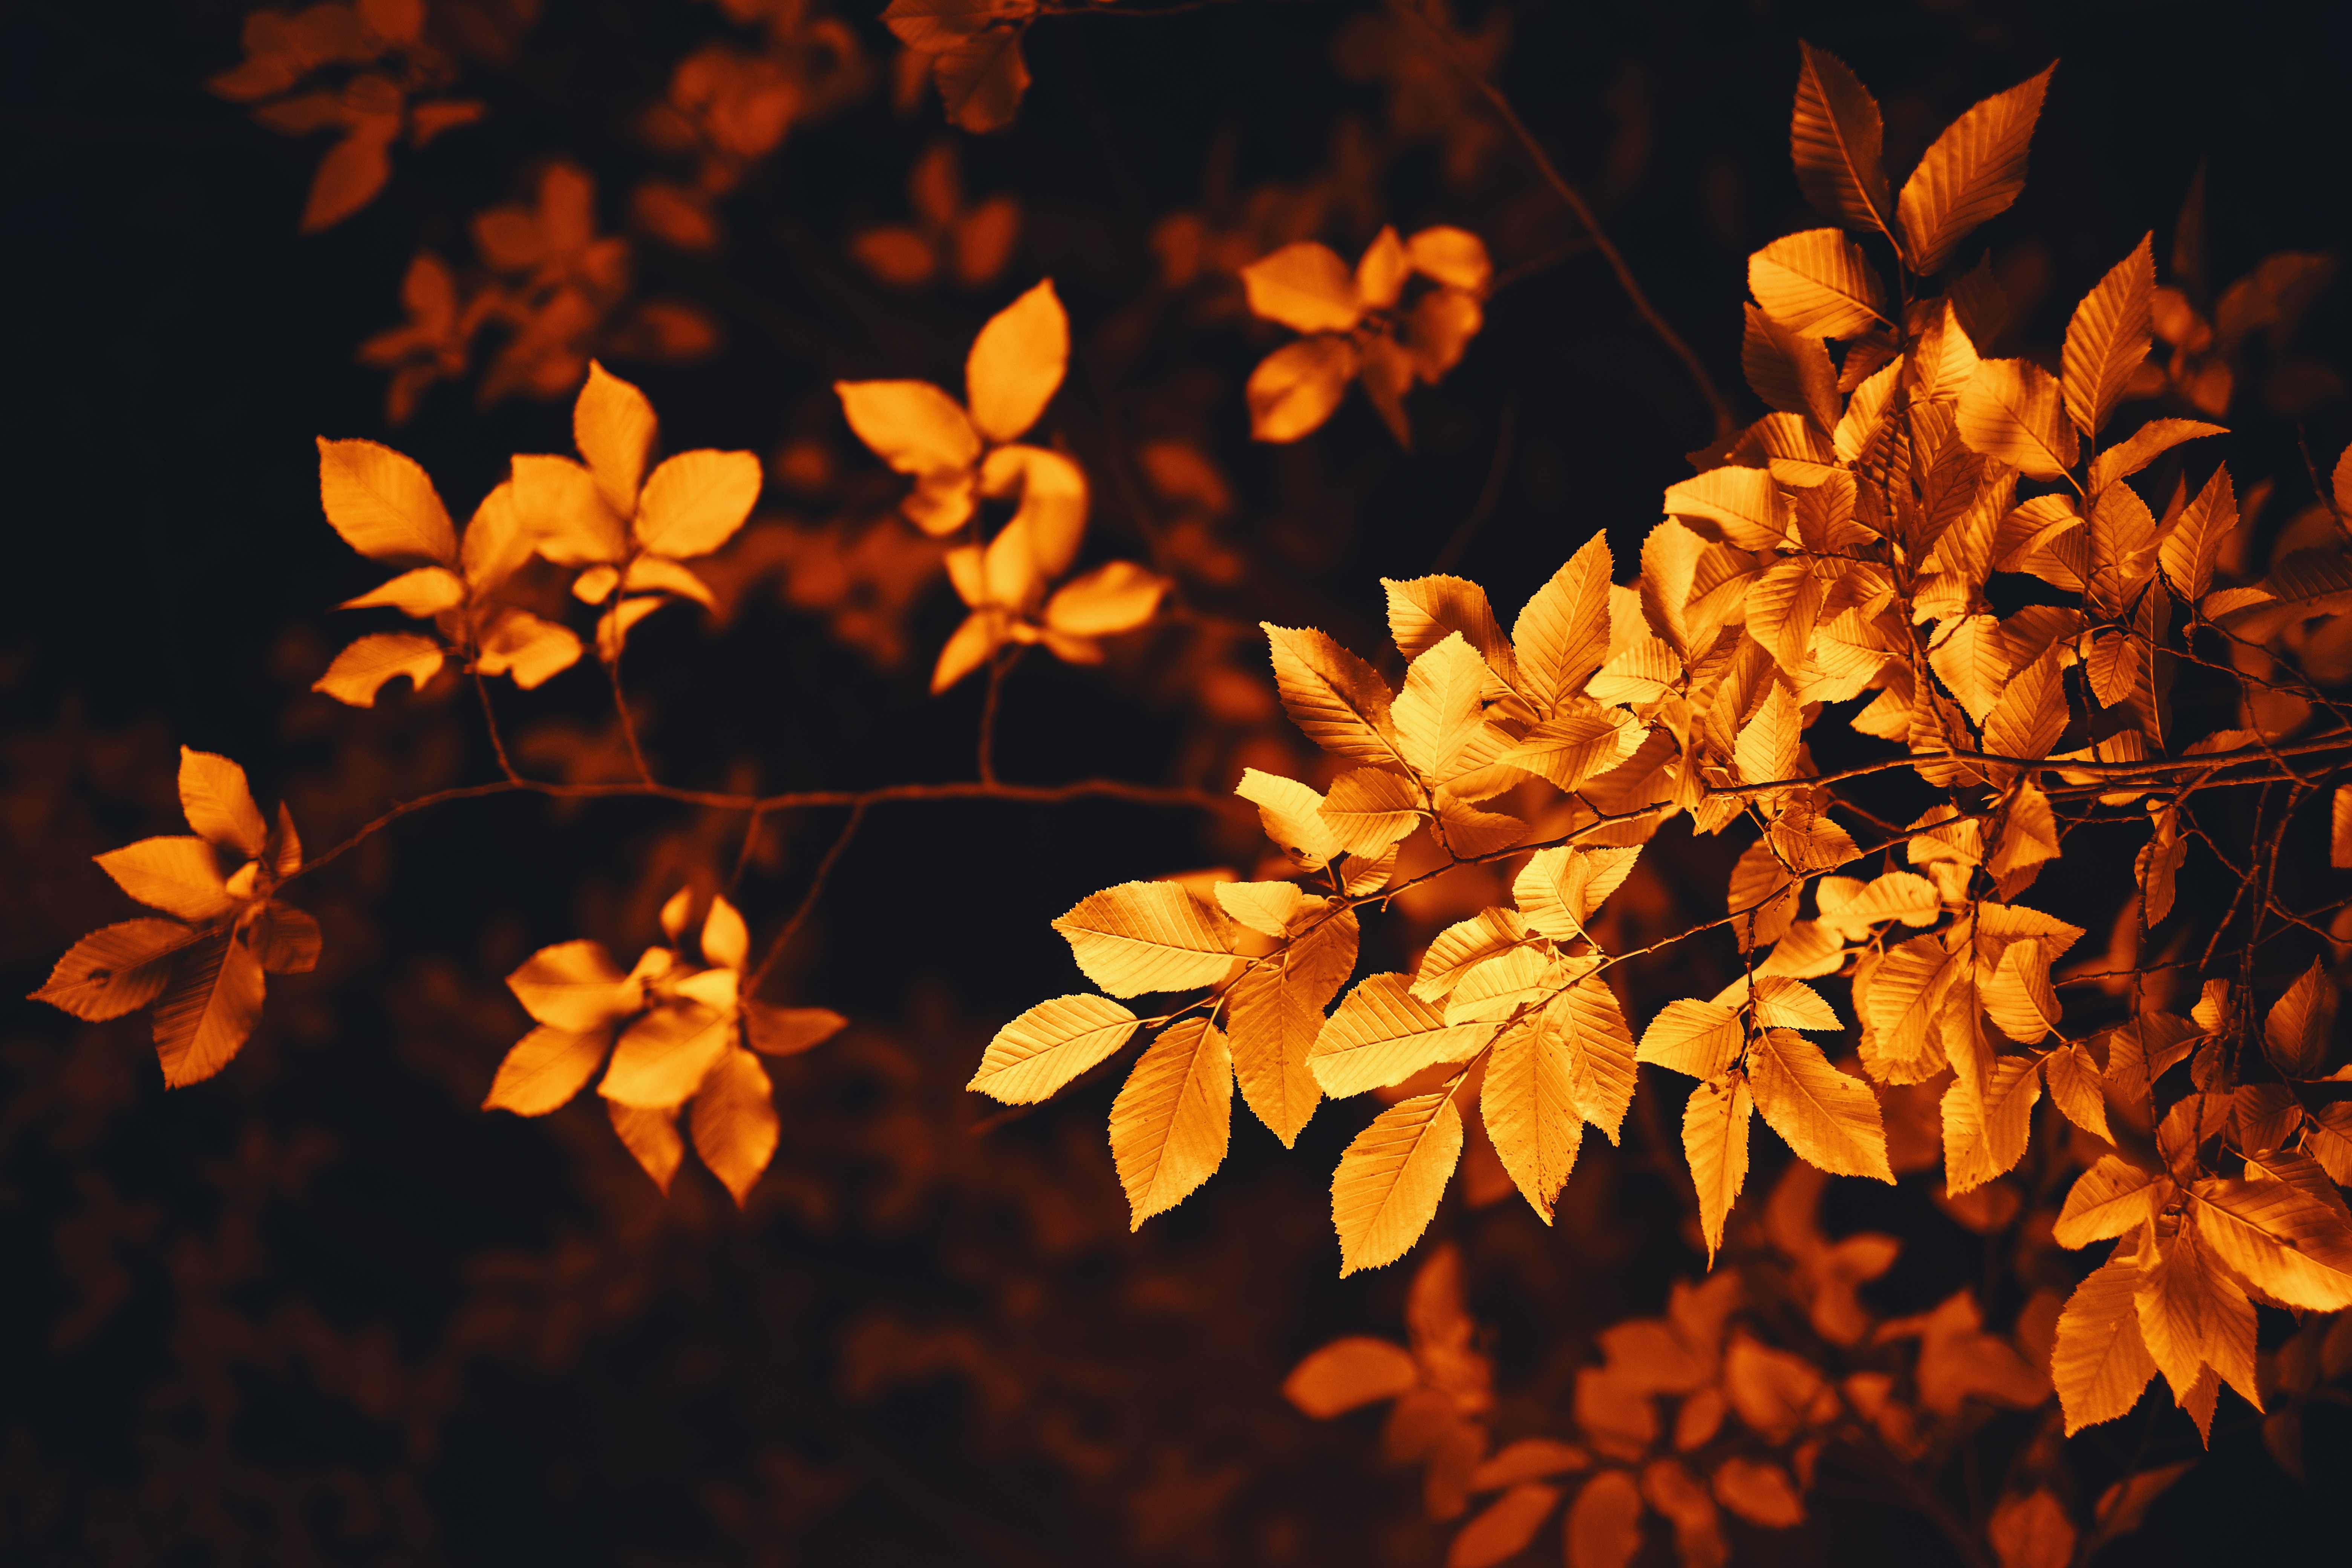 blur, smooth, nature, leaves, autumn, branch, foliage lock screen backgrounds